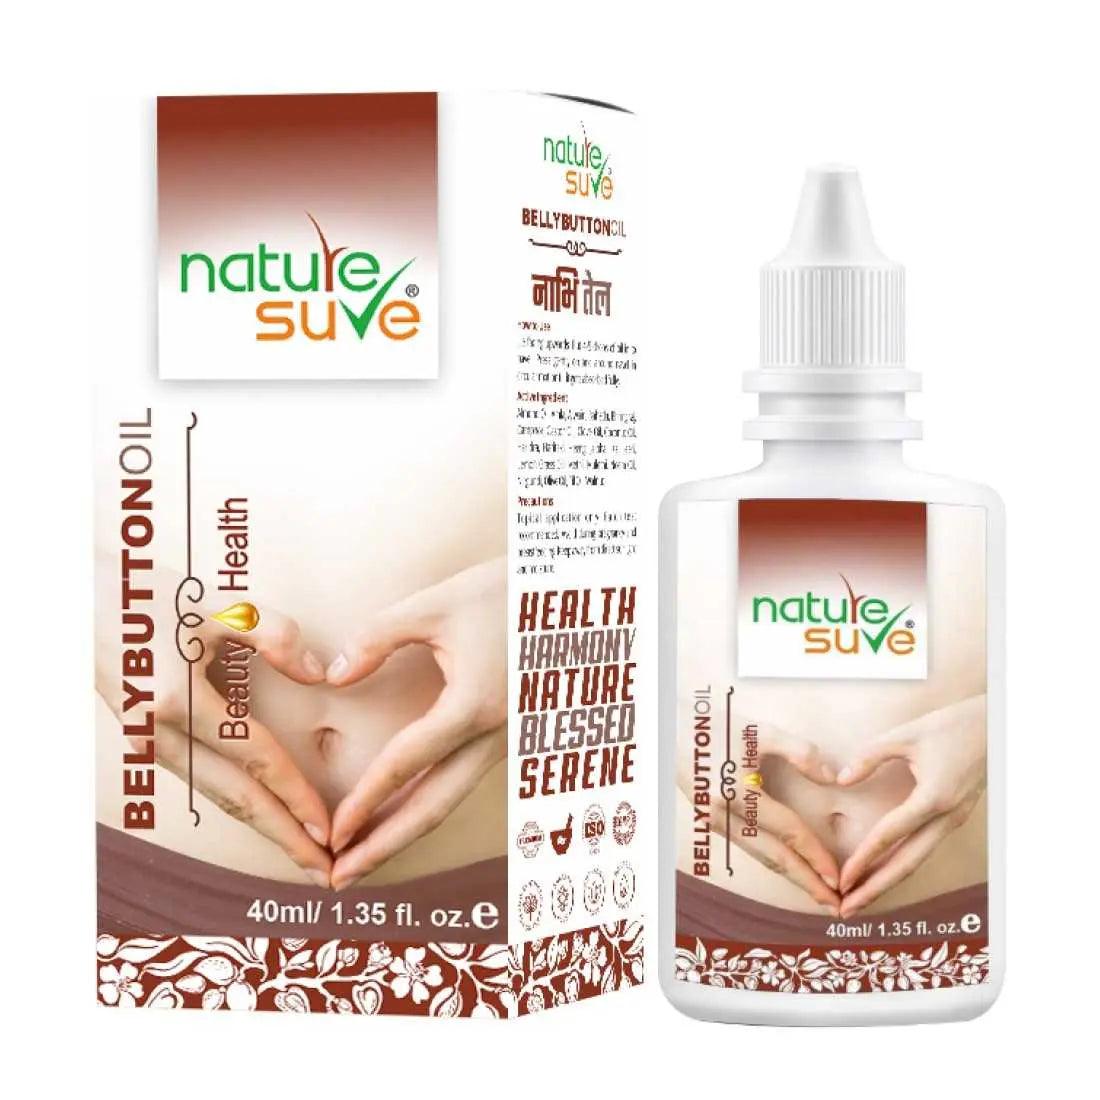 Nature Sure Belly Button Nabhi Oil for Health and Beauty in Men & Women - 40ml 8906116281116